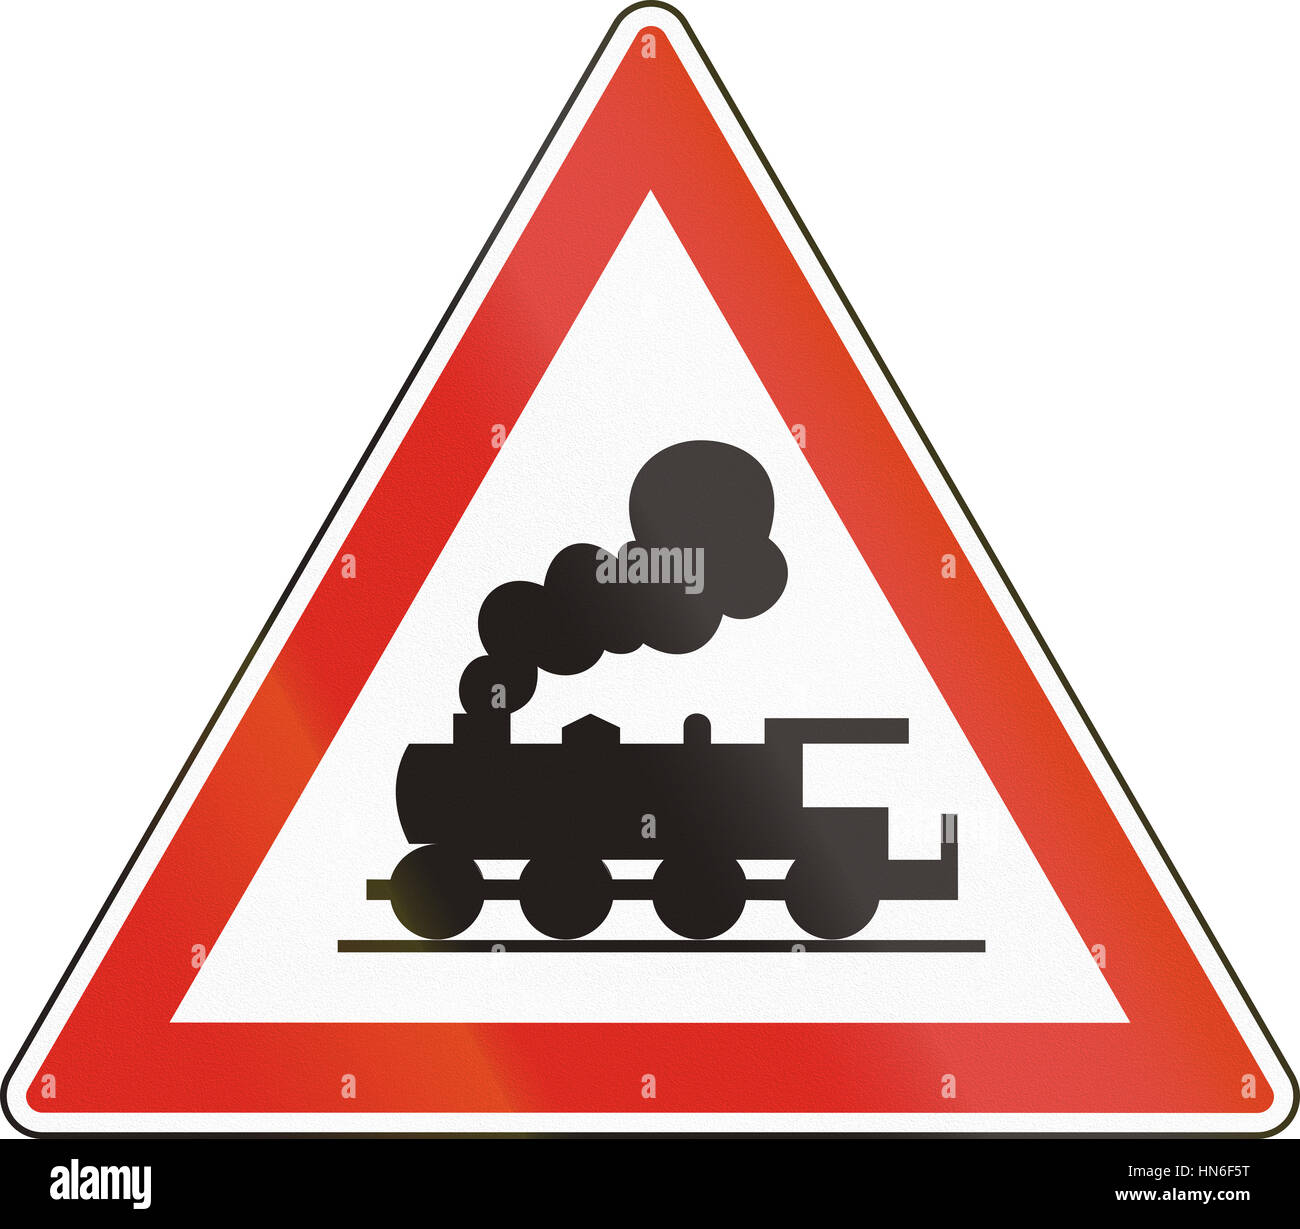 Hungarian Warning Road Sign Level Crossing Without Barrier Or Gates Ahead Stock Photo Alamy